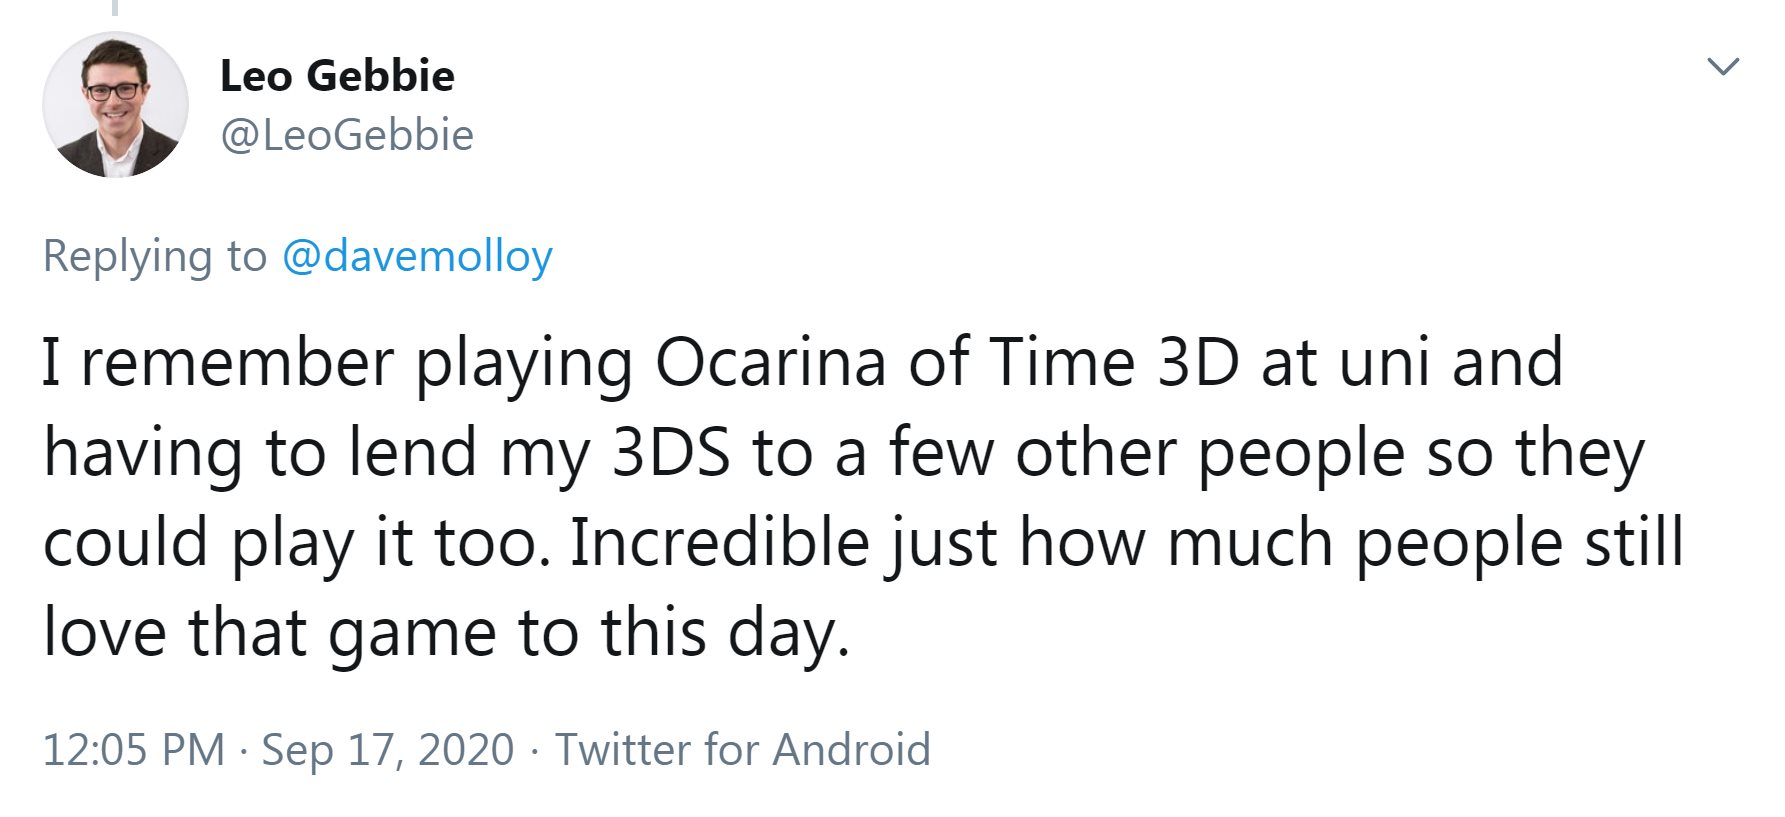 Tweet from @LeoGebbie: I remember playing Ocarina of Time 3D at uni and having to lend my 3DS to a few other people so they could play it too. Incredible just how much people still love that game to this day.